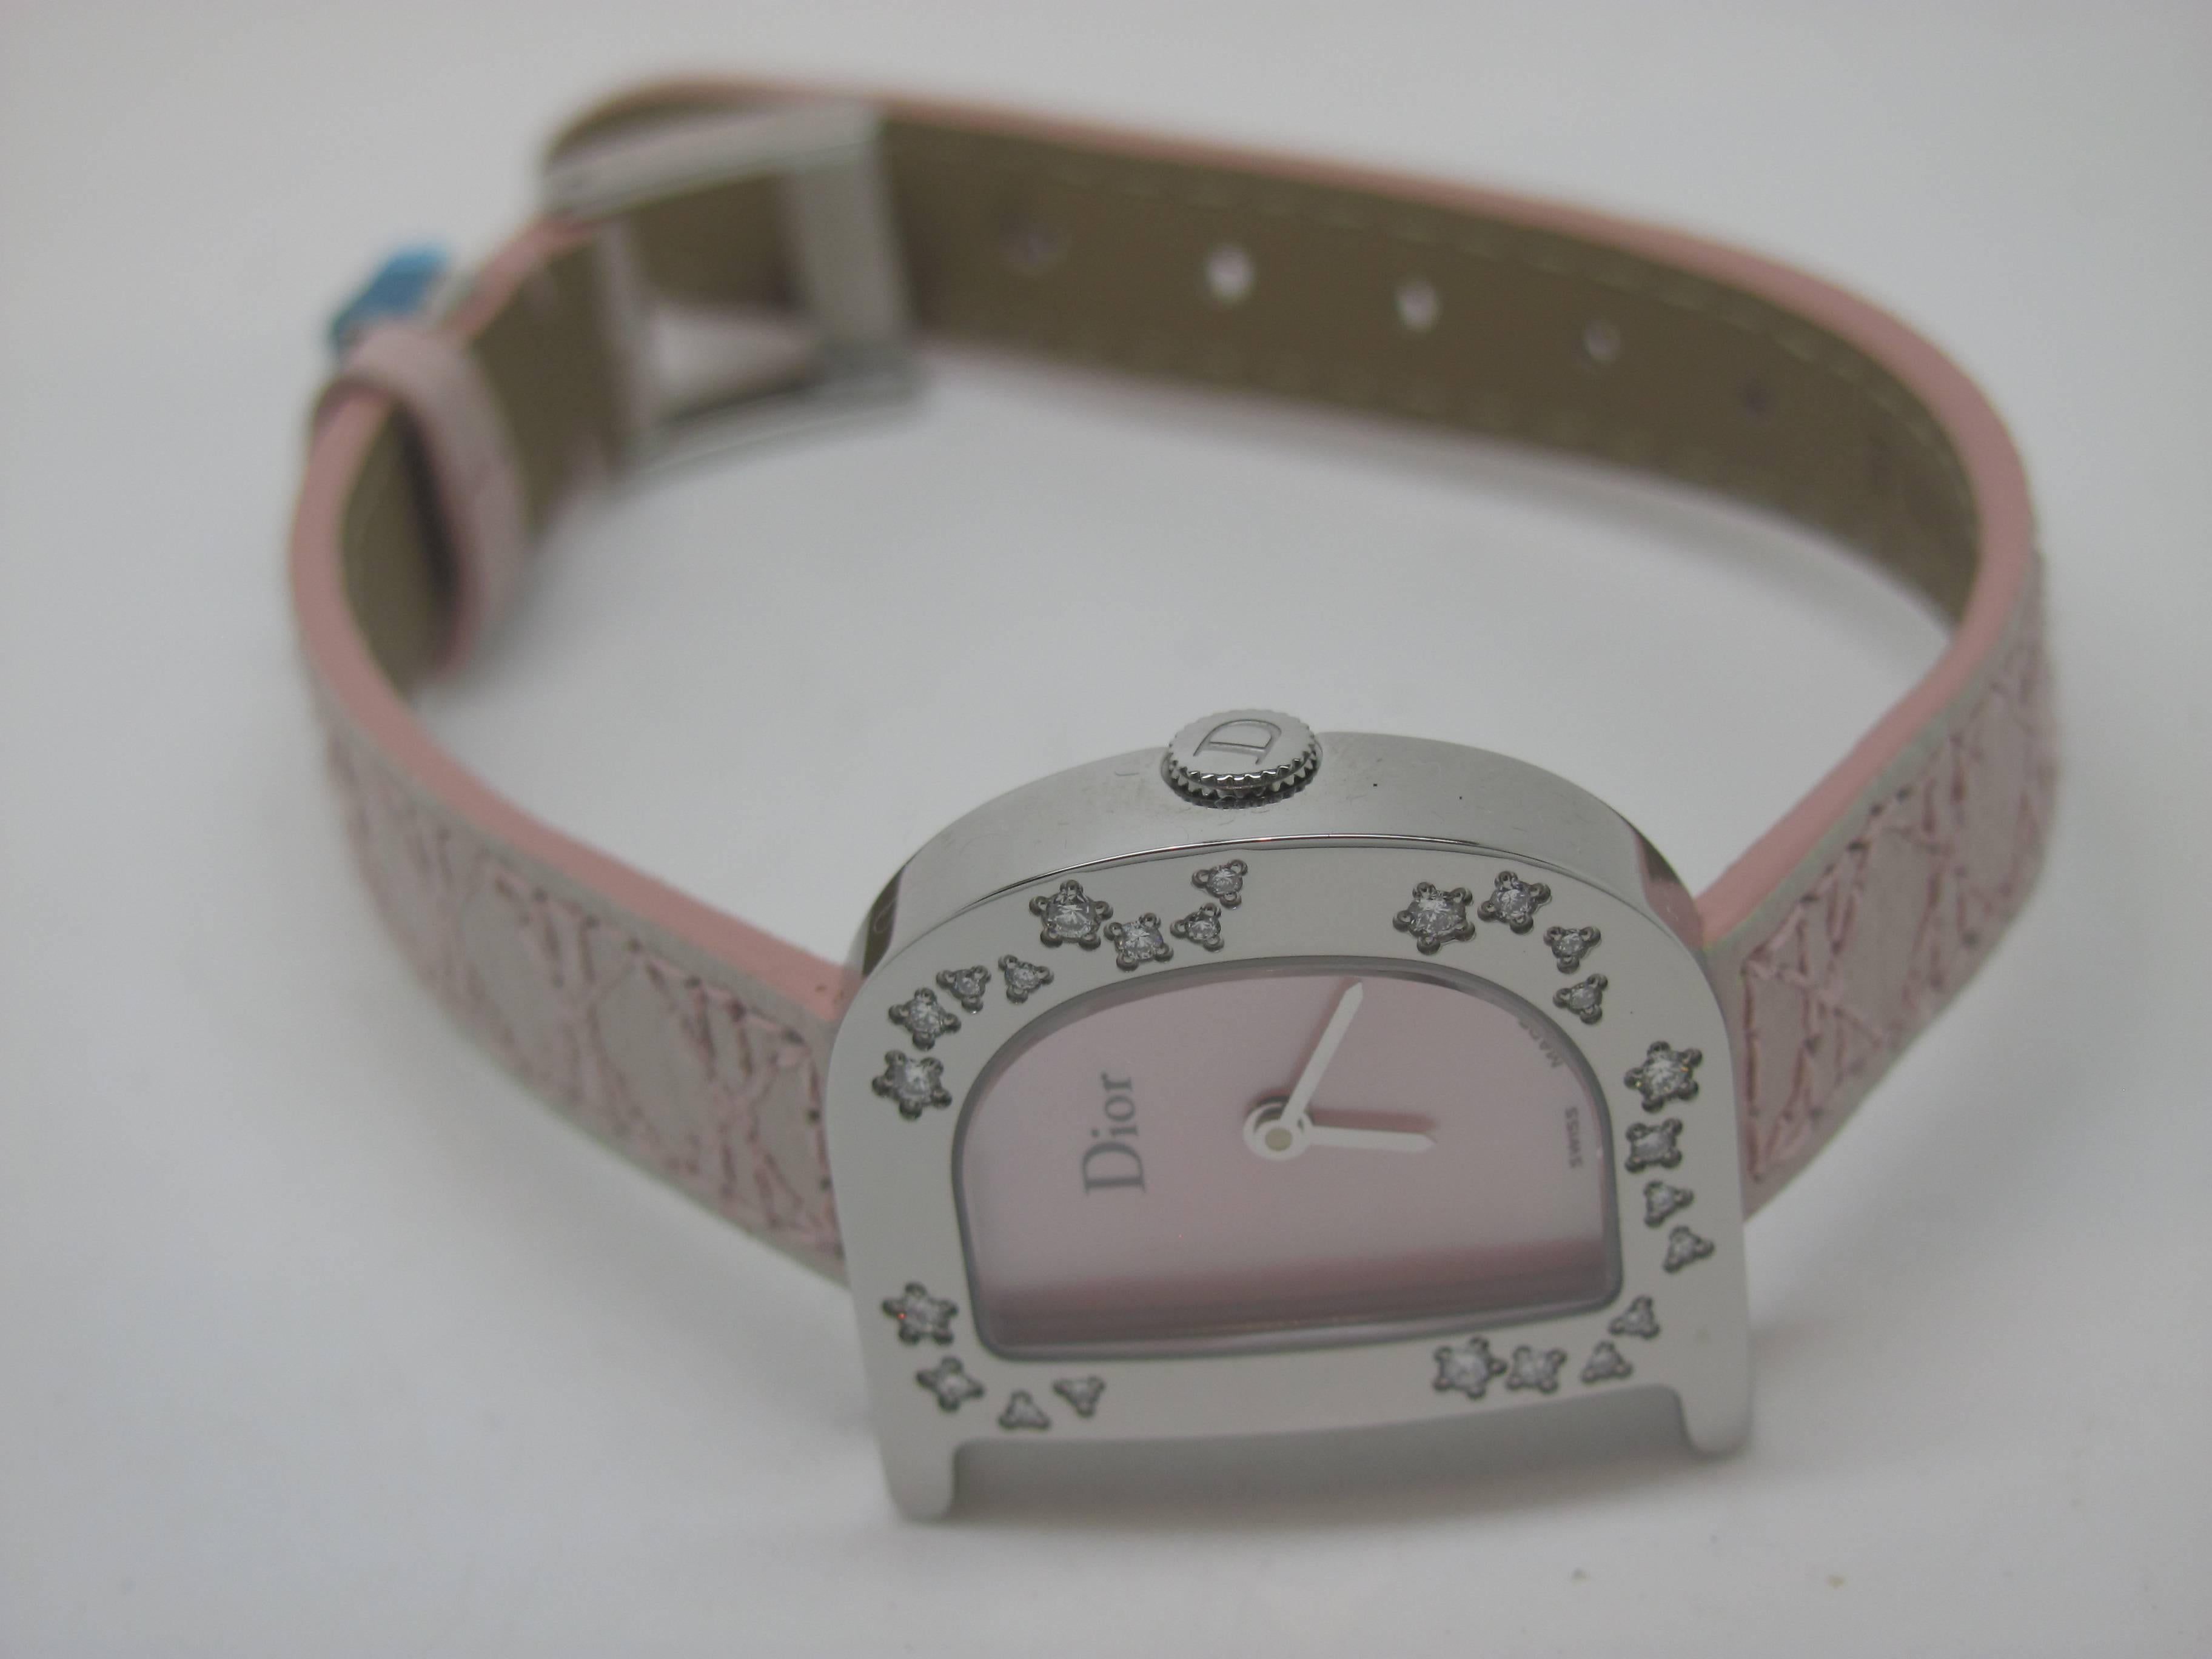 In excellent condition, Dior Watch with diaamonds in the bezel (0,26 carat)

Pink Dior Leather strap.

Excellent condition almost never worn